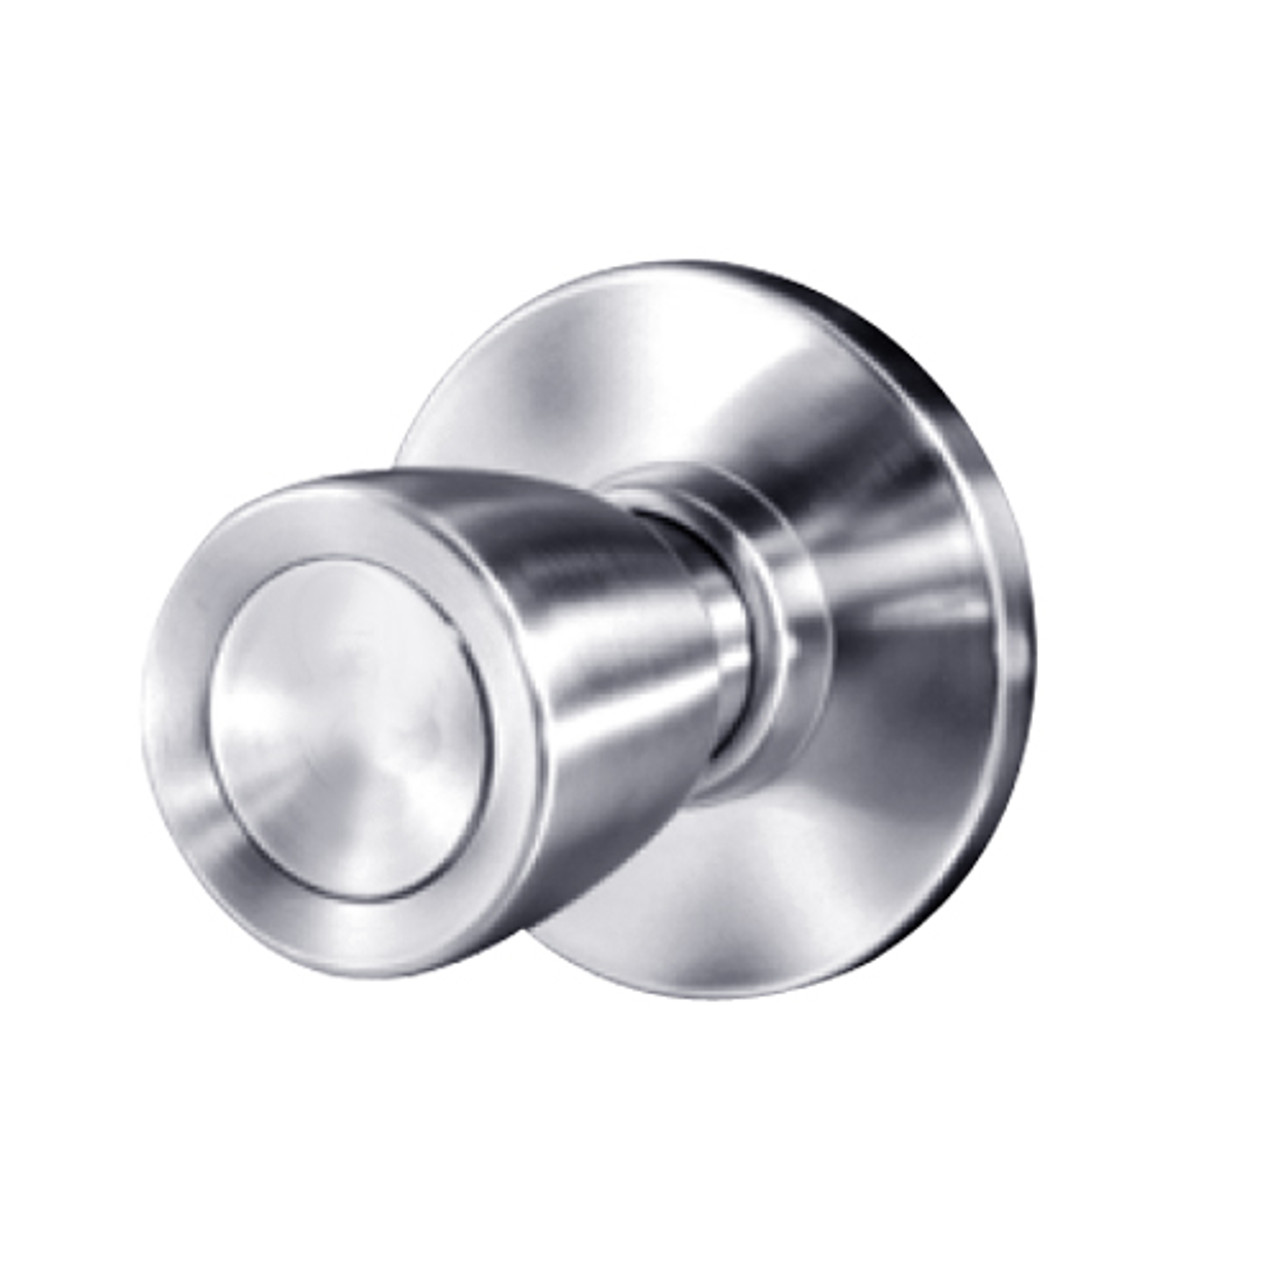 8K30N6AS3626 Best 8K Series Passage Heavy Duty Cylindrical Knob Locks with Tulip Style in Satin Chrome